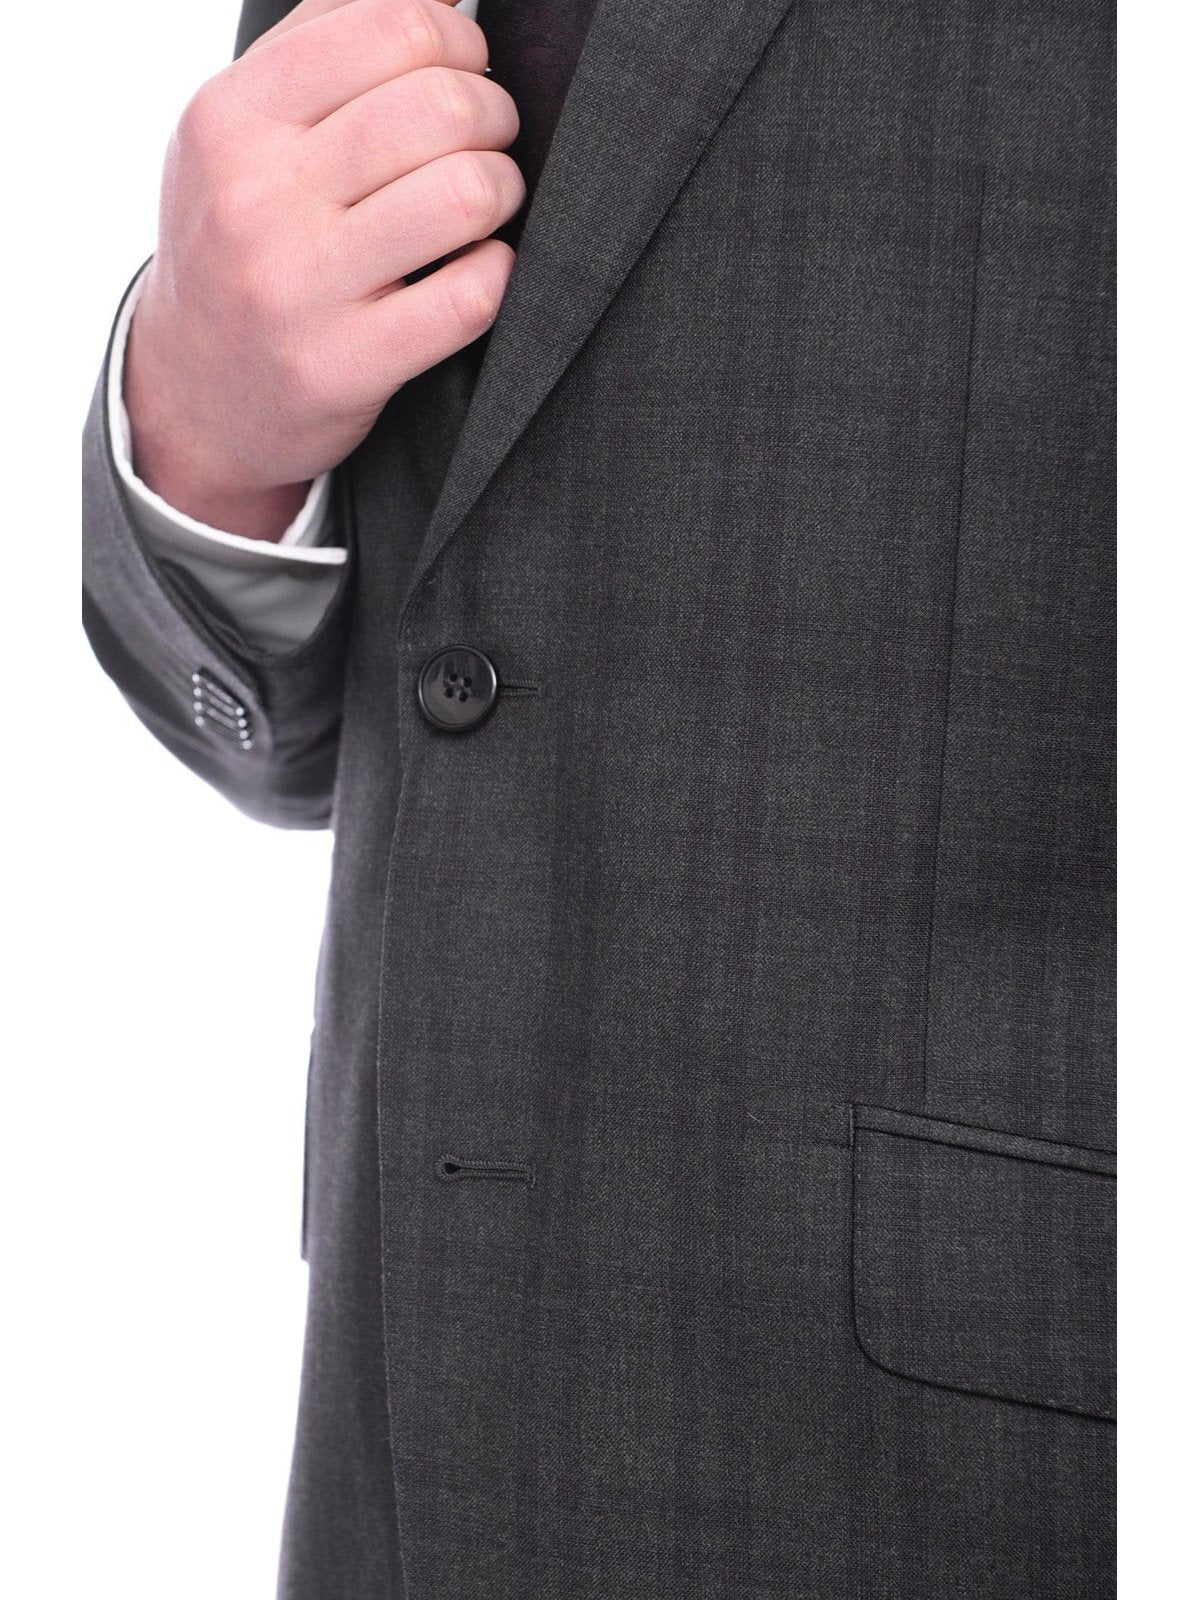 Napoli TWO PIECE SUITS Napoli Slim Fit Charcoal Gray & Purple Plaid Half Canvassed Super 150s Wool Suit